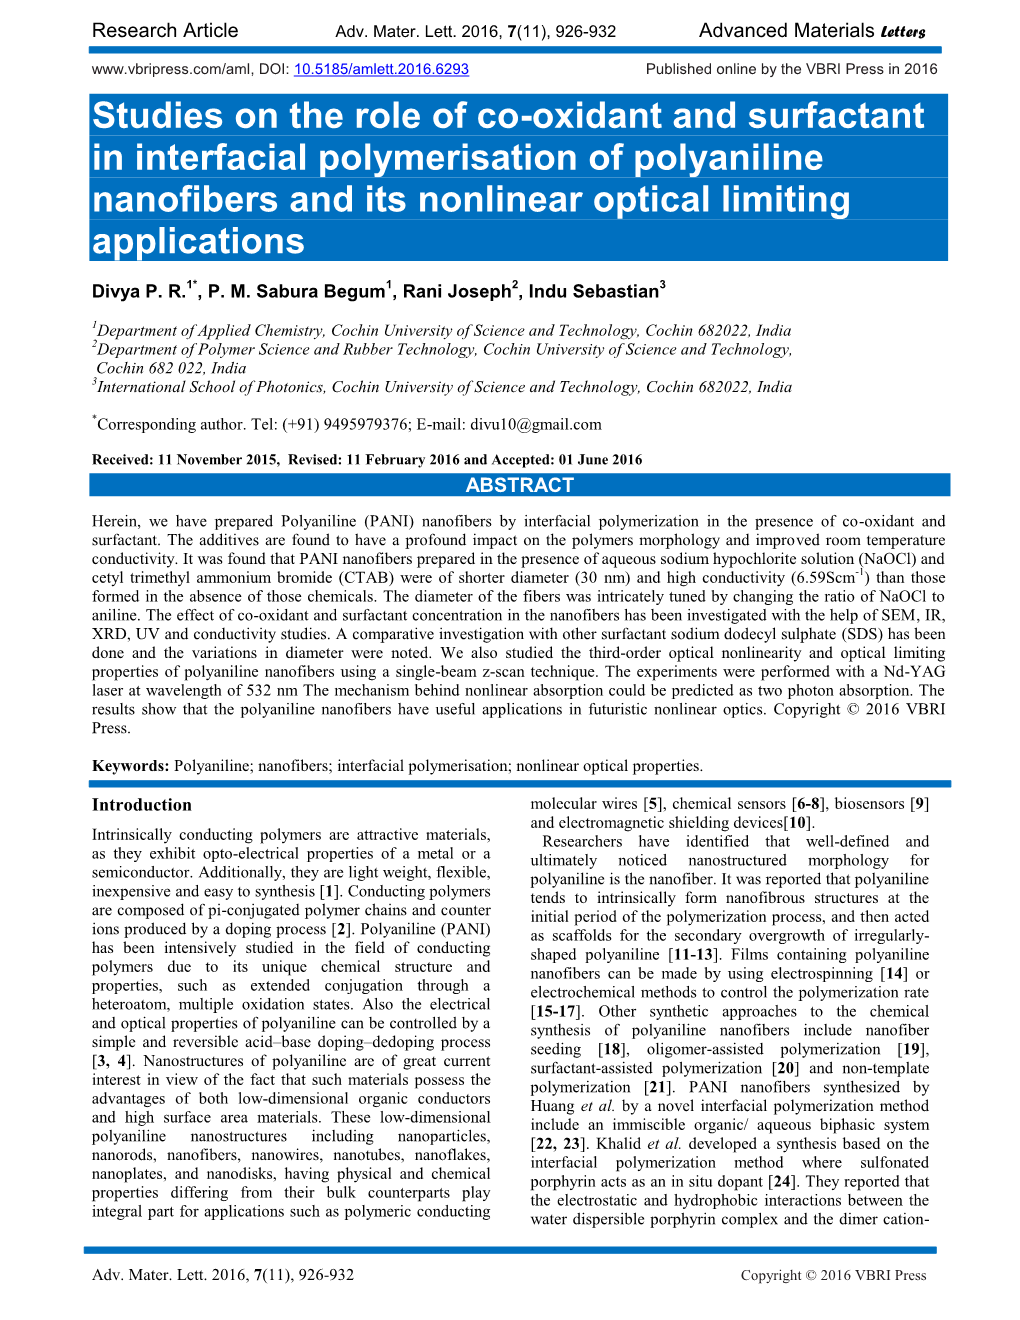 Studies on the Role of Co-Oxidant and Surfactant in Interfacial Polymerisation of Polyaniline Nanofibers and Its Nonlinear Optical Limiting Applications